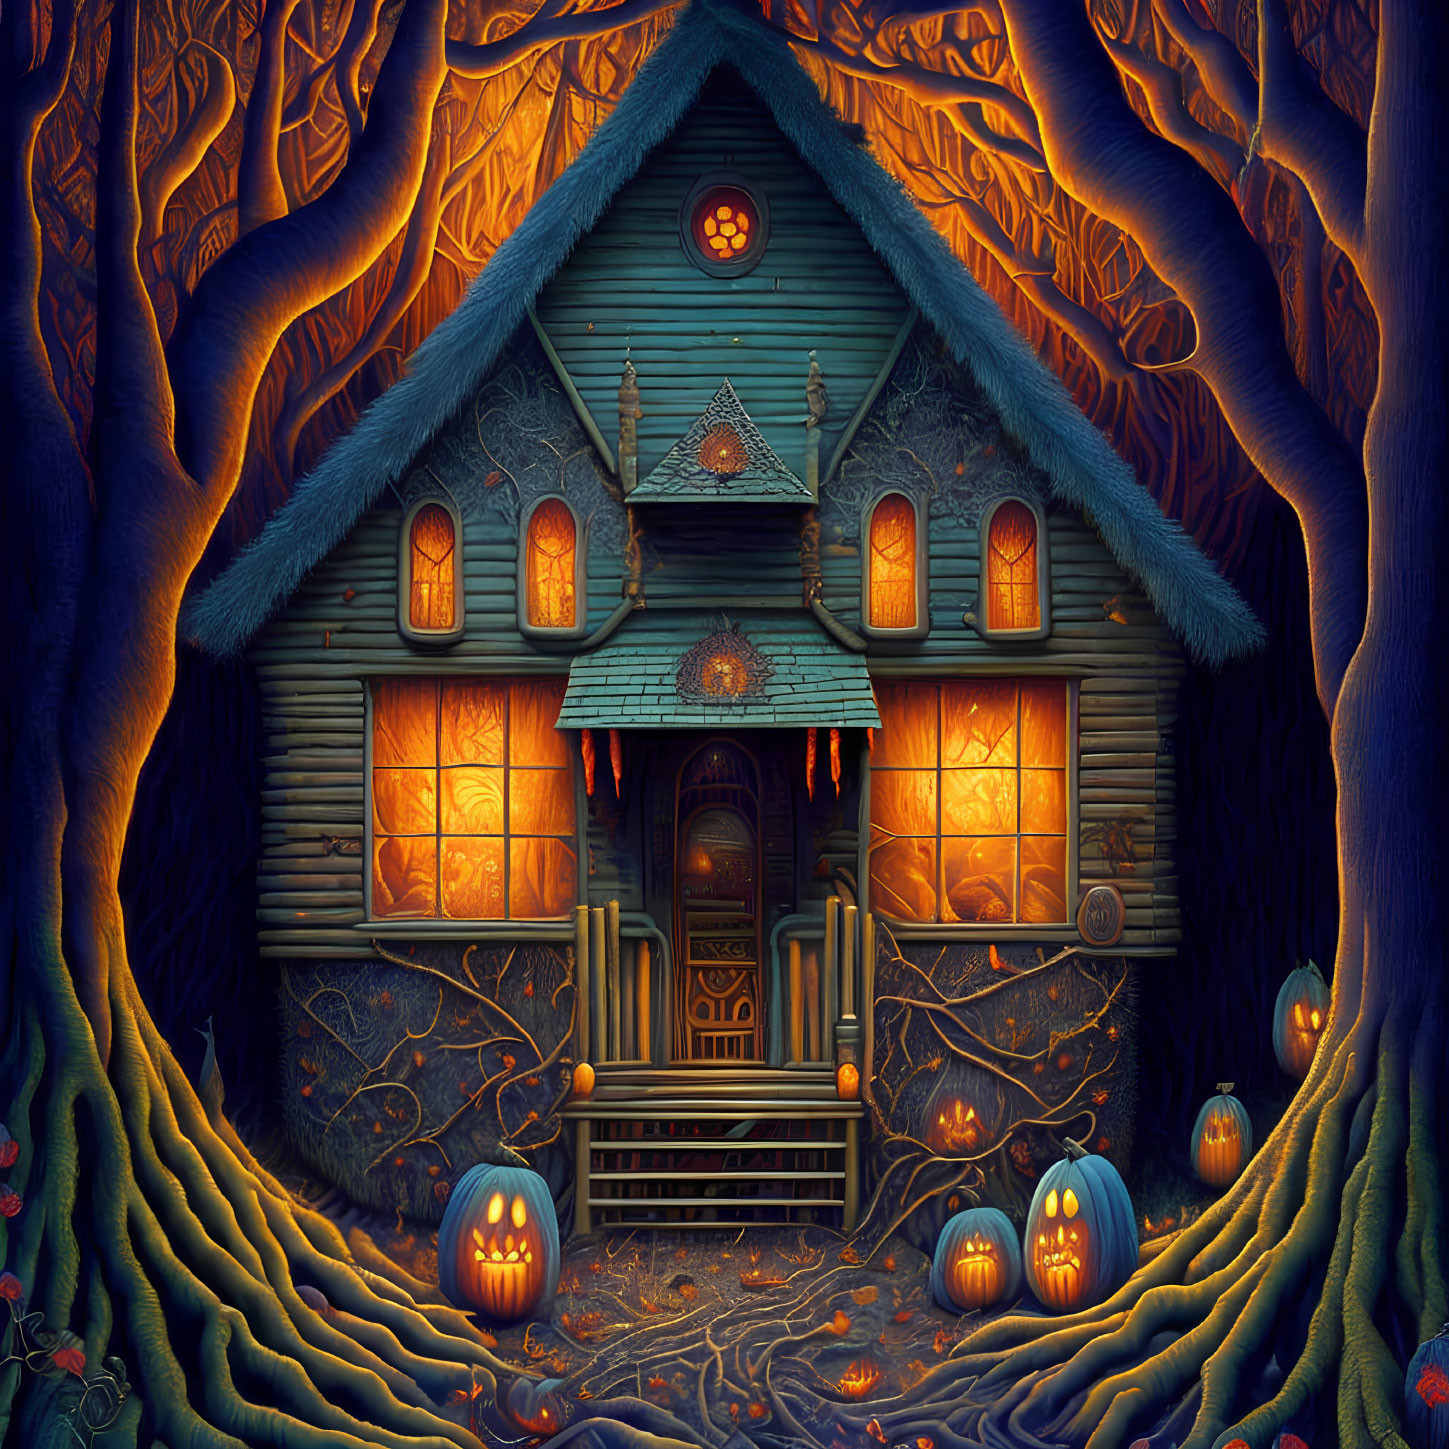 Illustration of Spooky House with Glowing Windows in Mystical Blue Light